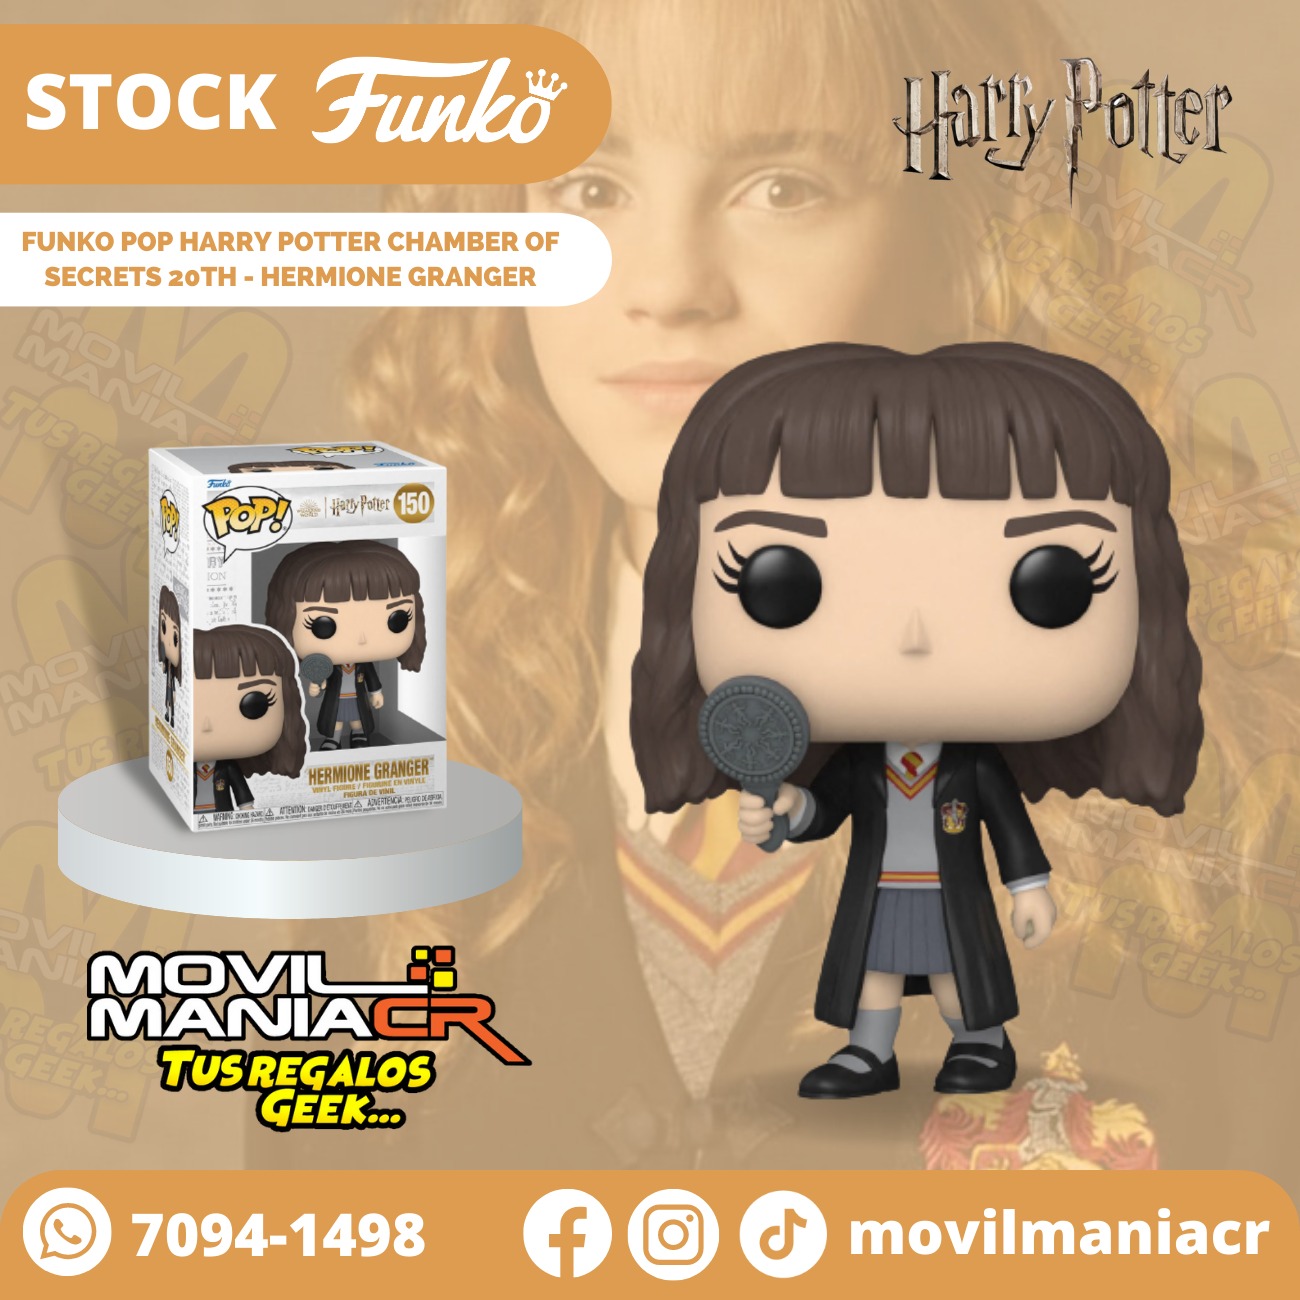 Funko Pop Harry Potter and the Chamber of Secrets 20th Anniversary Hermione Granger #150